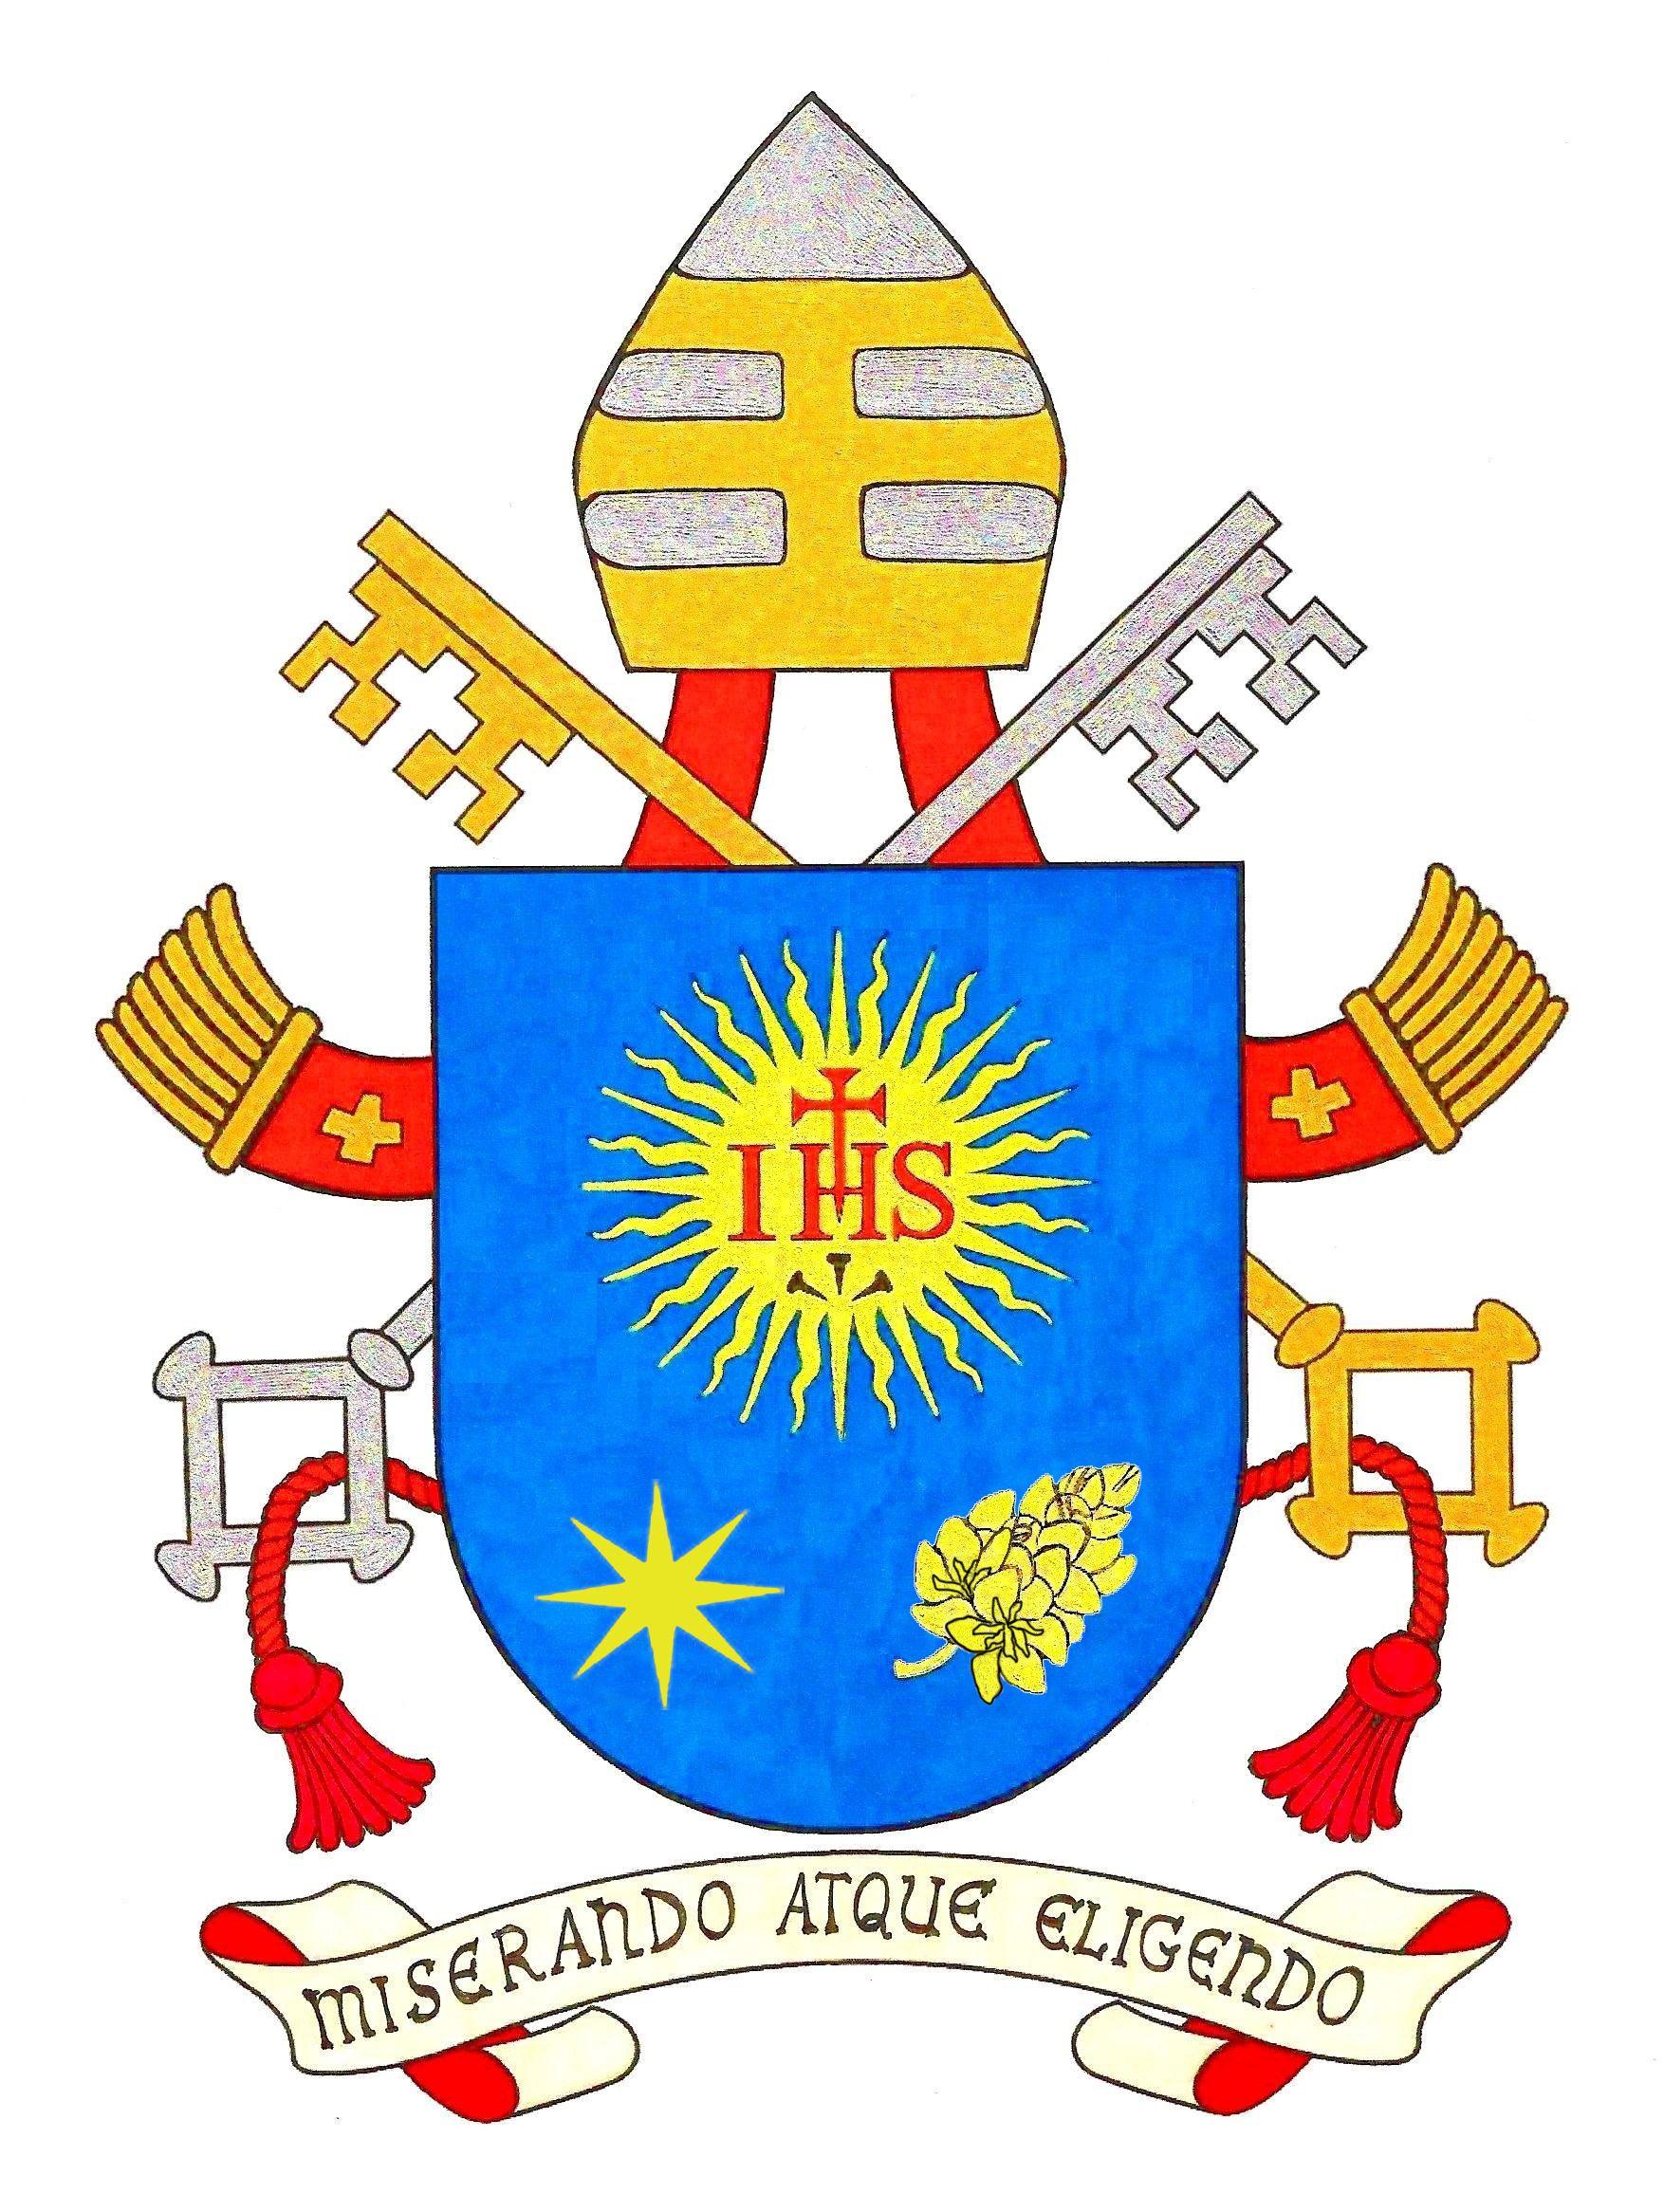 Vatican Logo - Pontifical Insigna Flag, Coat of Arms and Seal of the Holy See and of ...